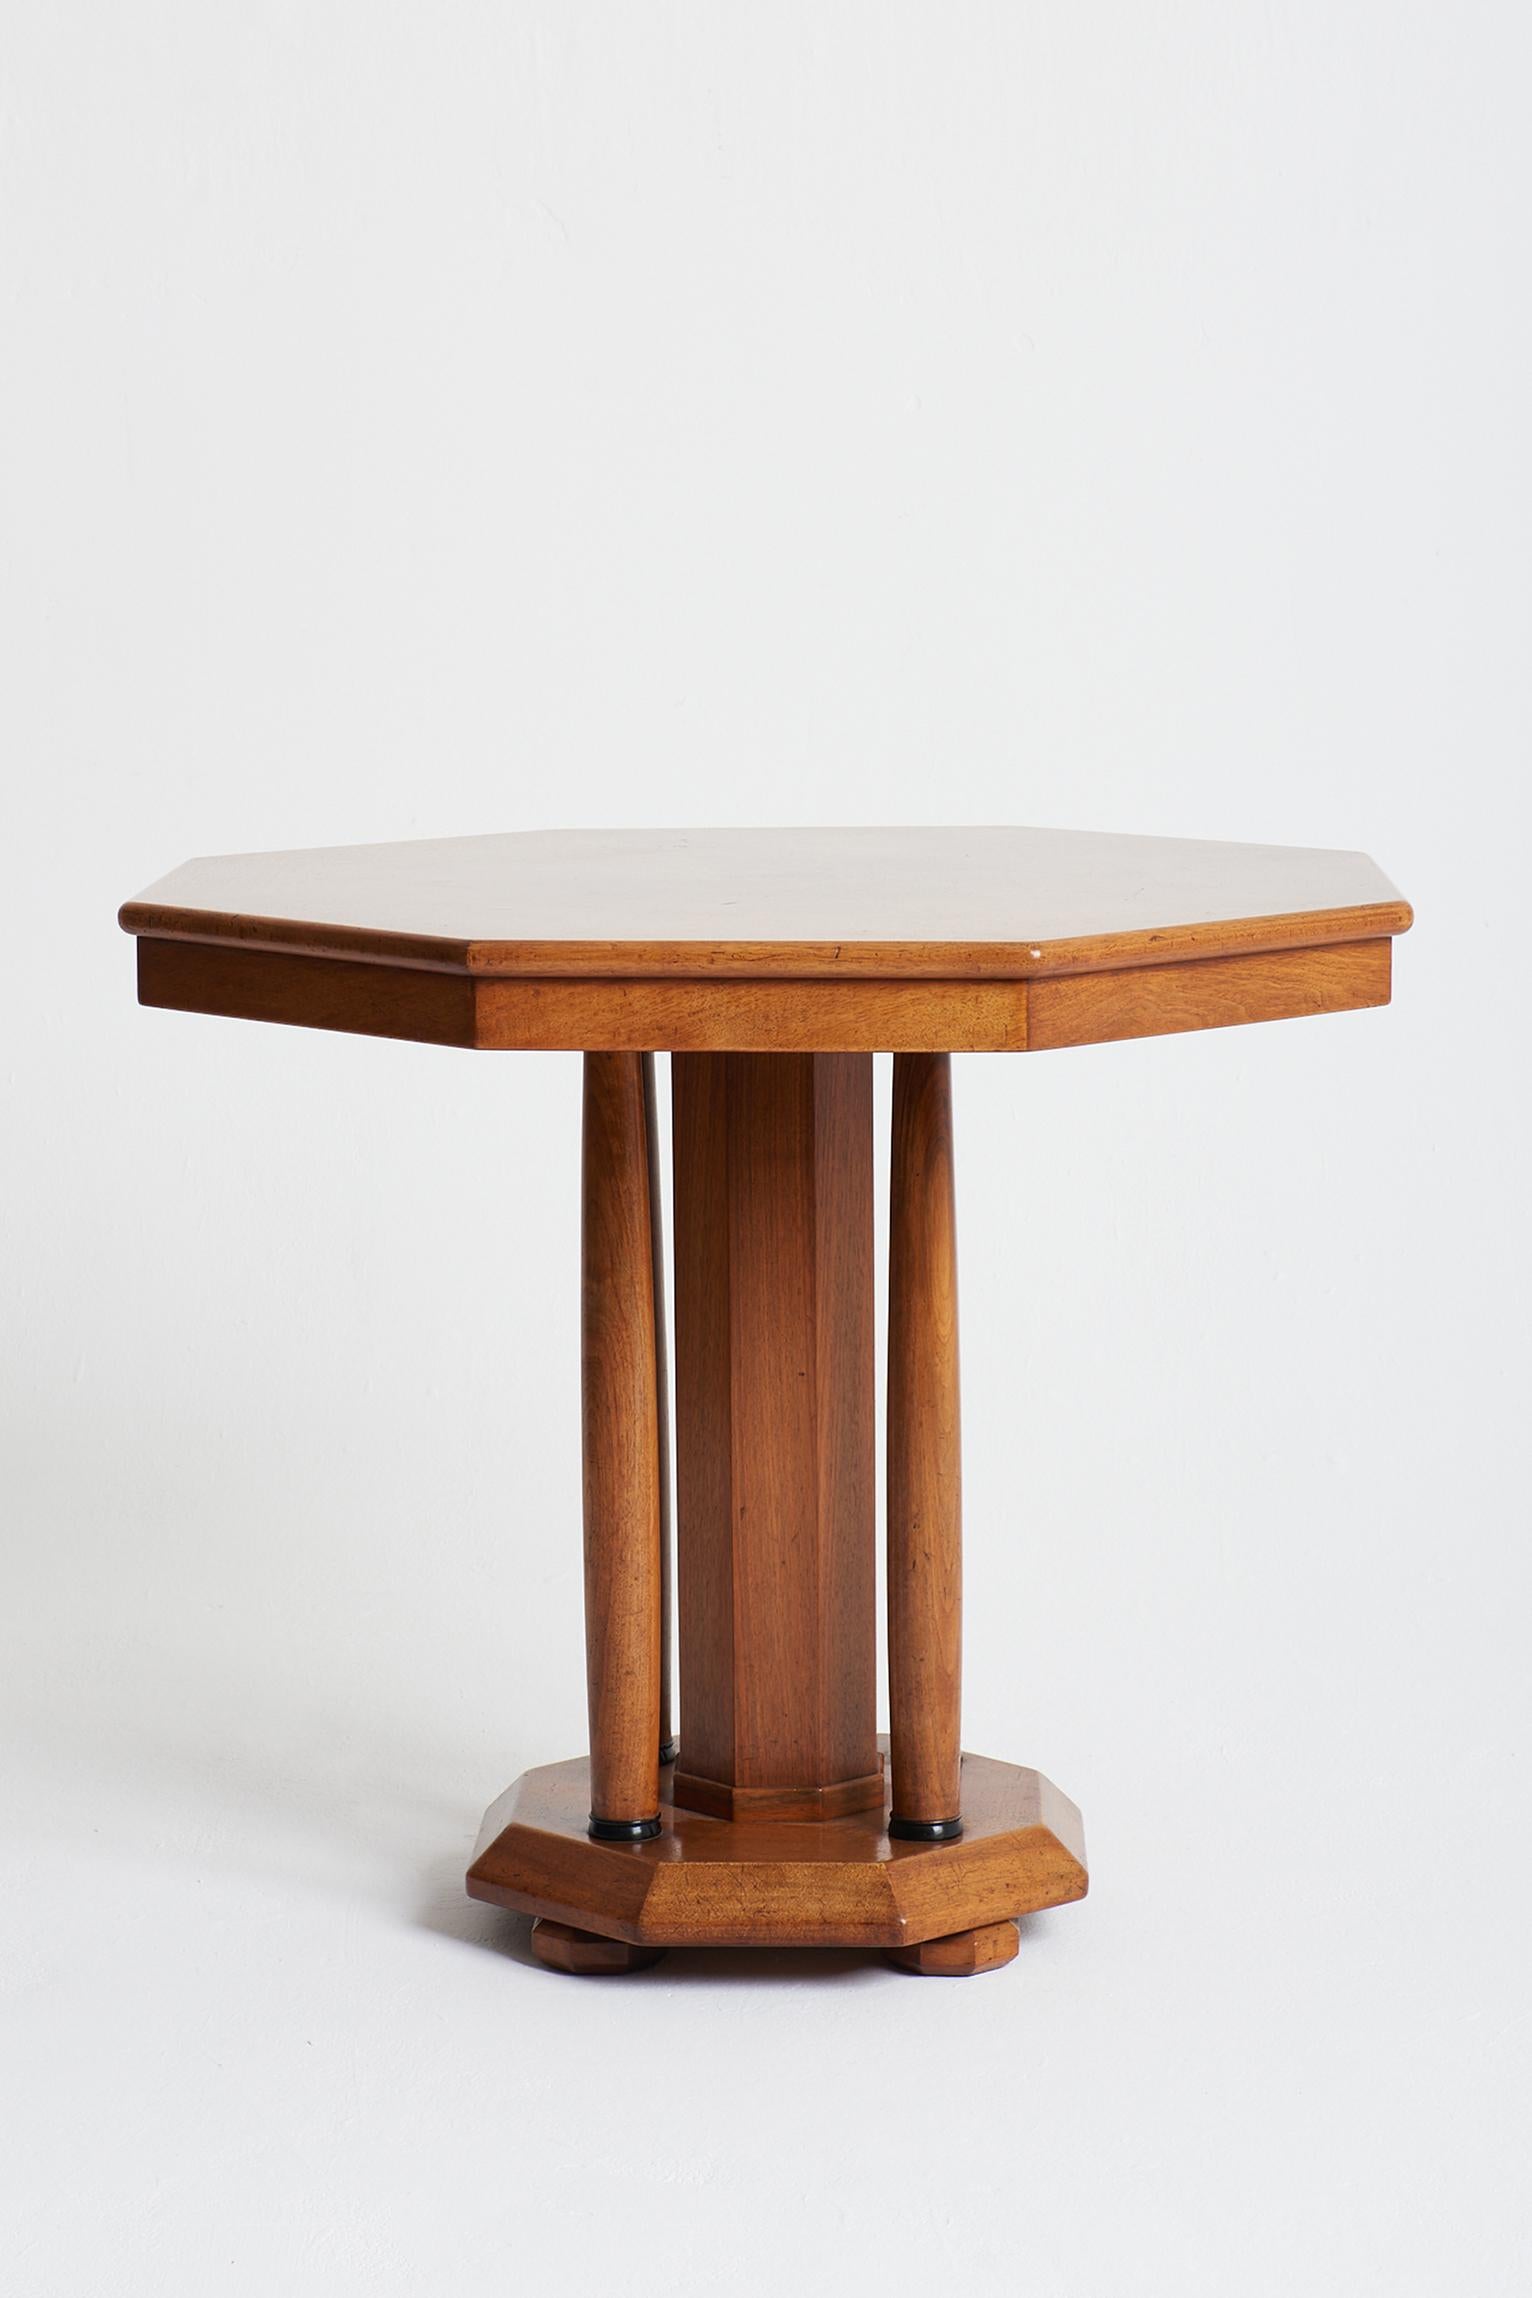 French Large Art Deco Centre Table